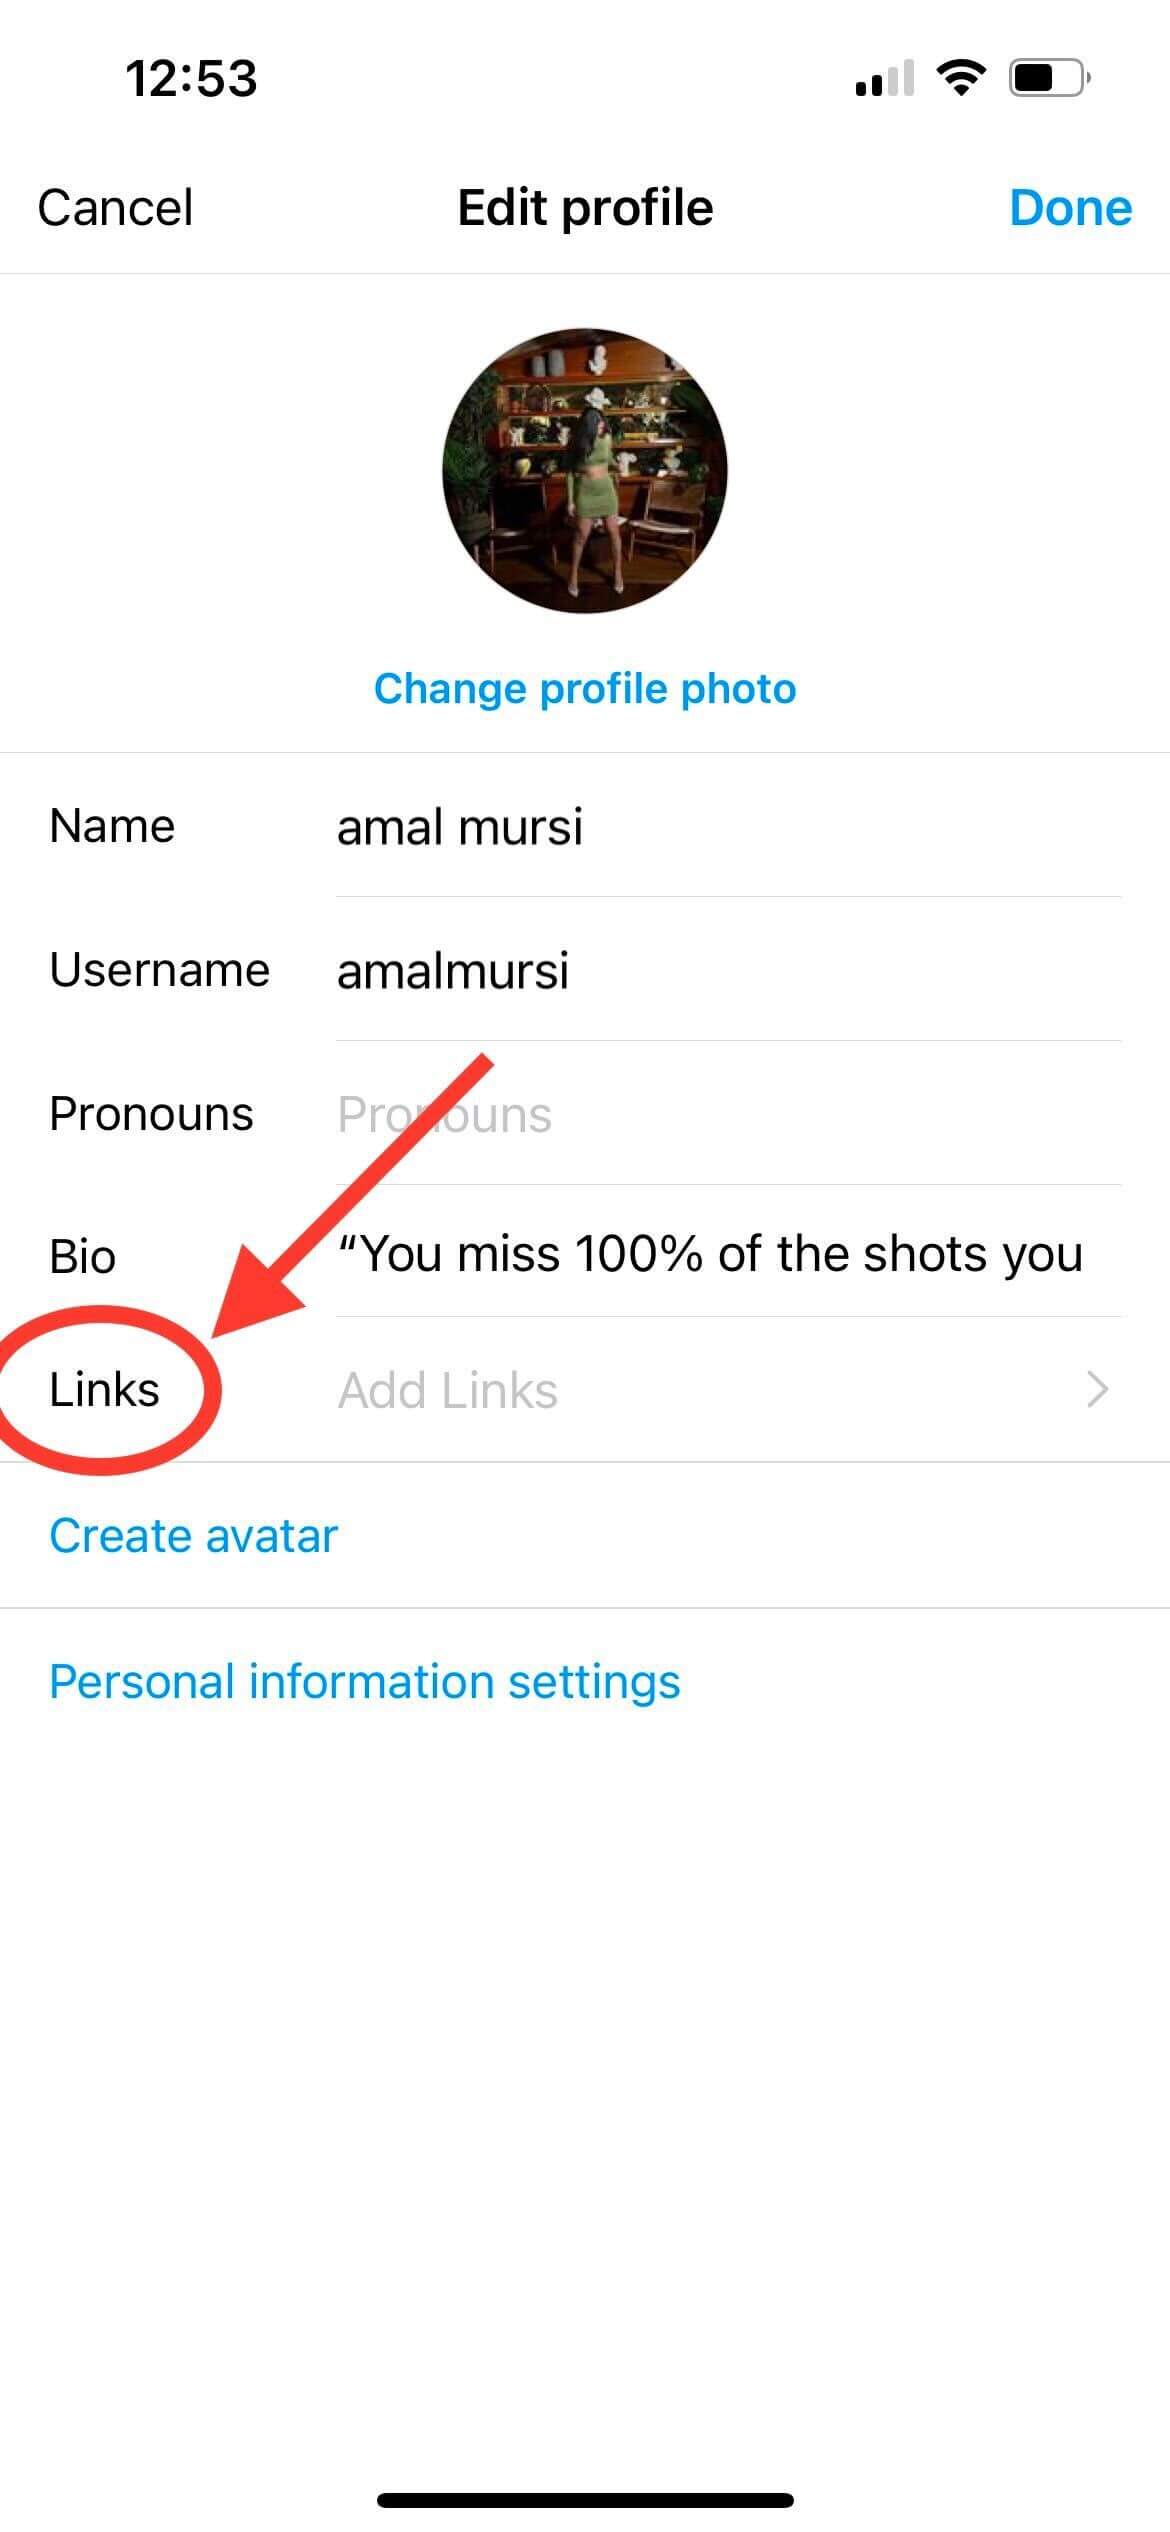 How To Find & Share Your TikTok URL: Profile, Posts, & More